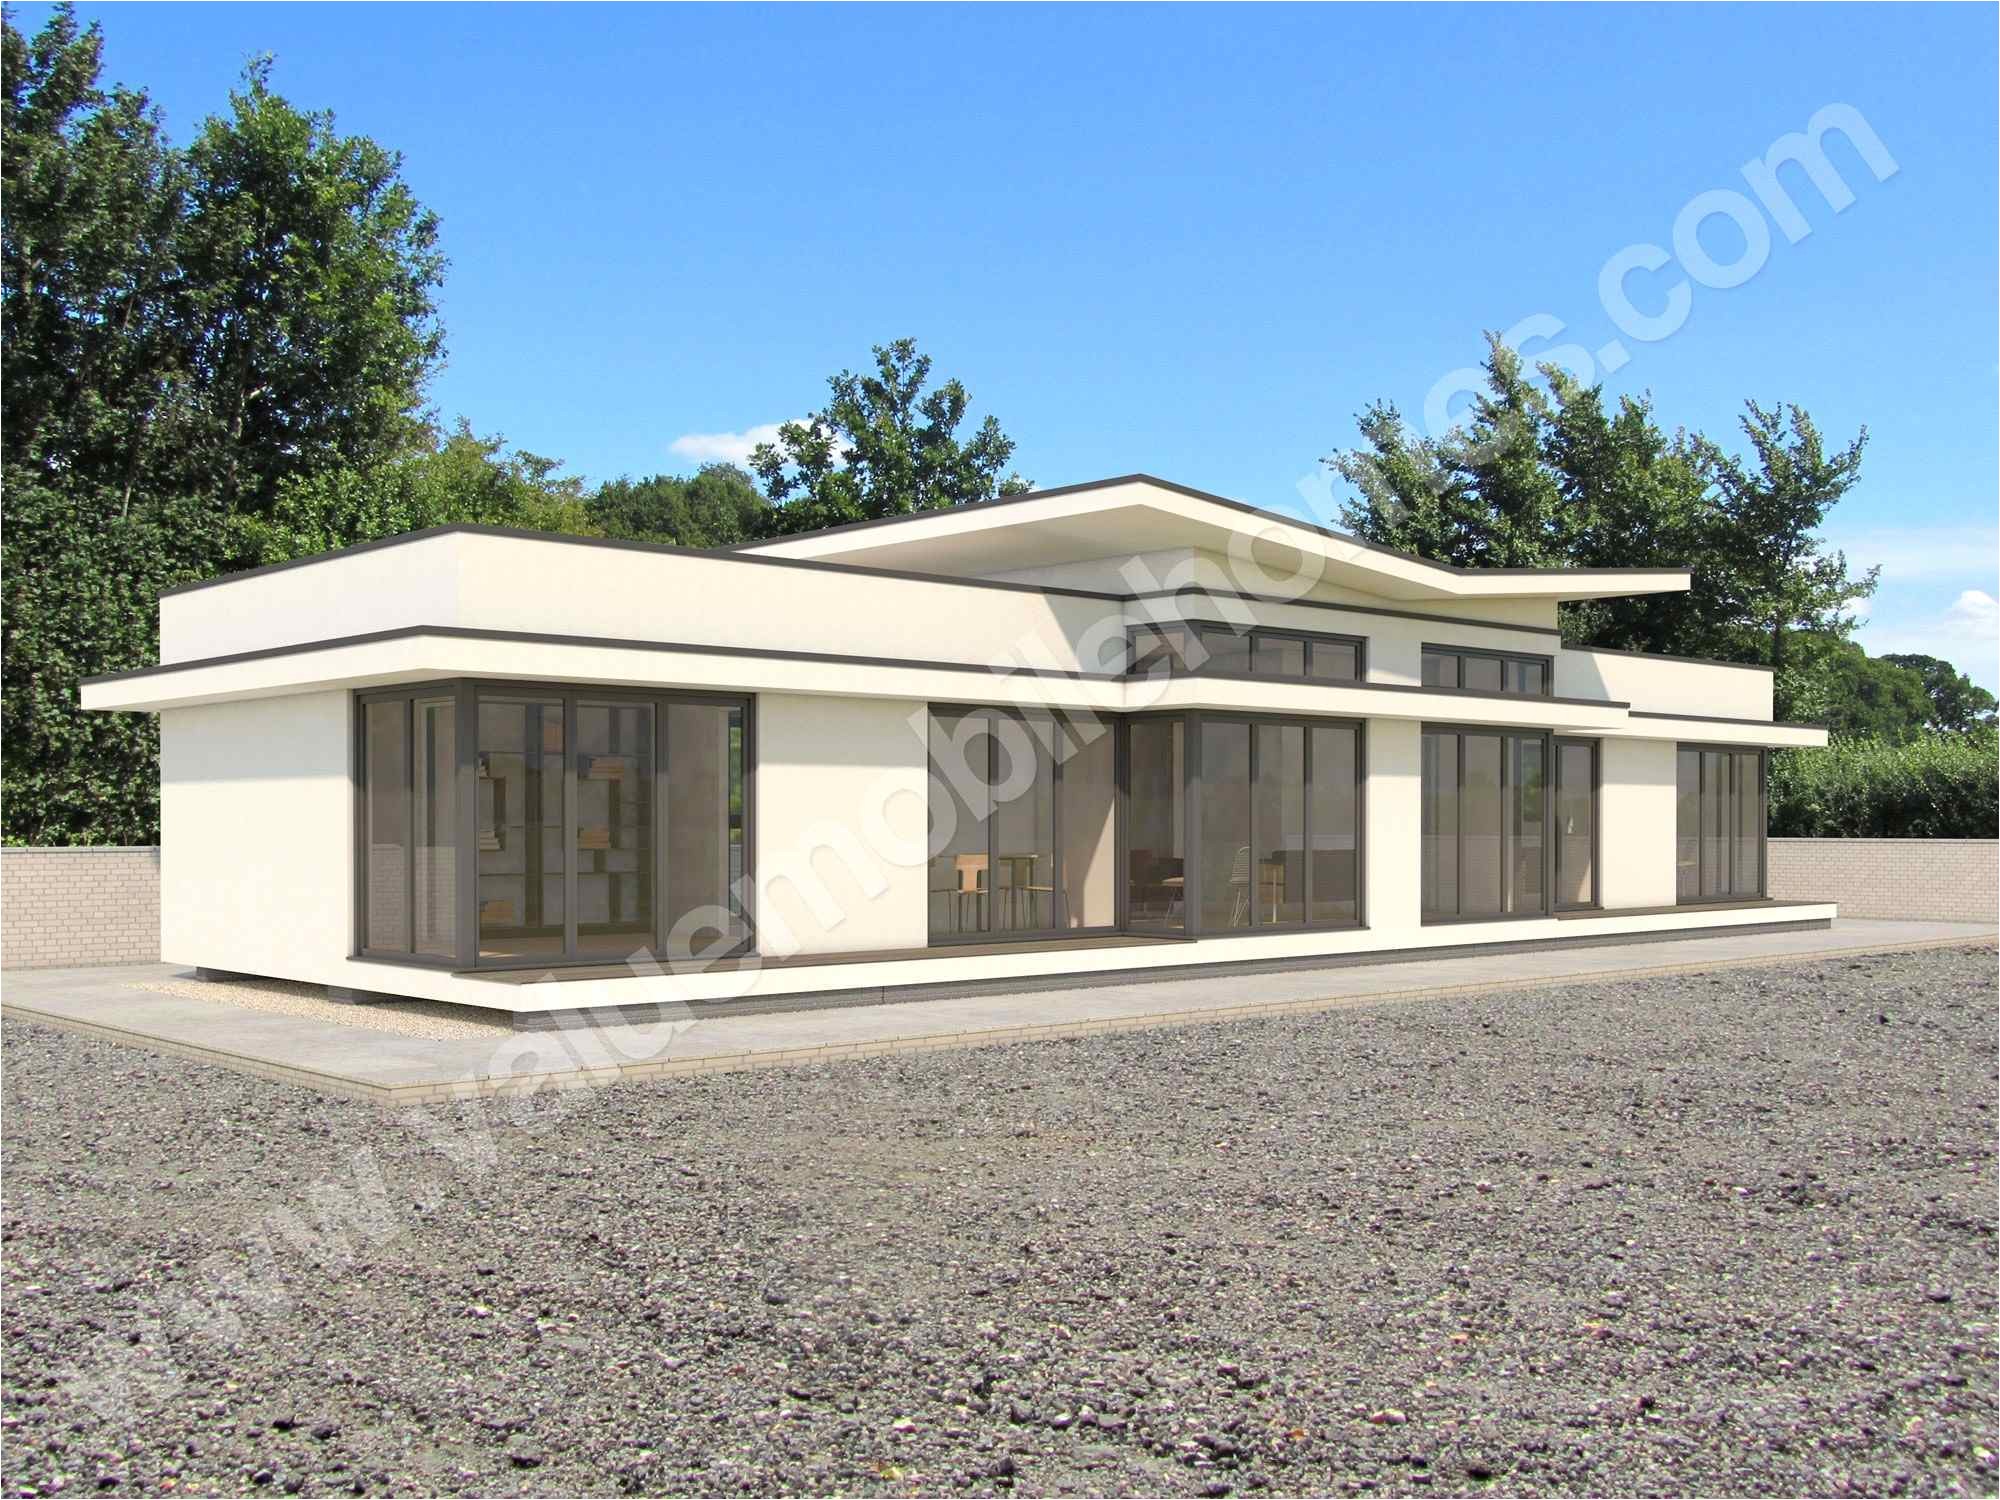 planning permission mobile home agricultural land